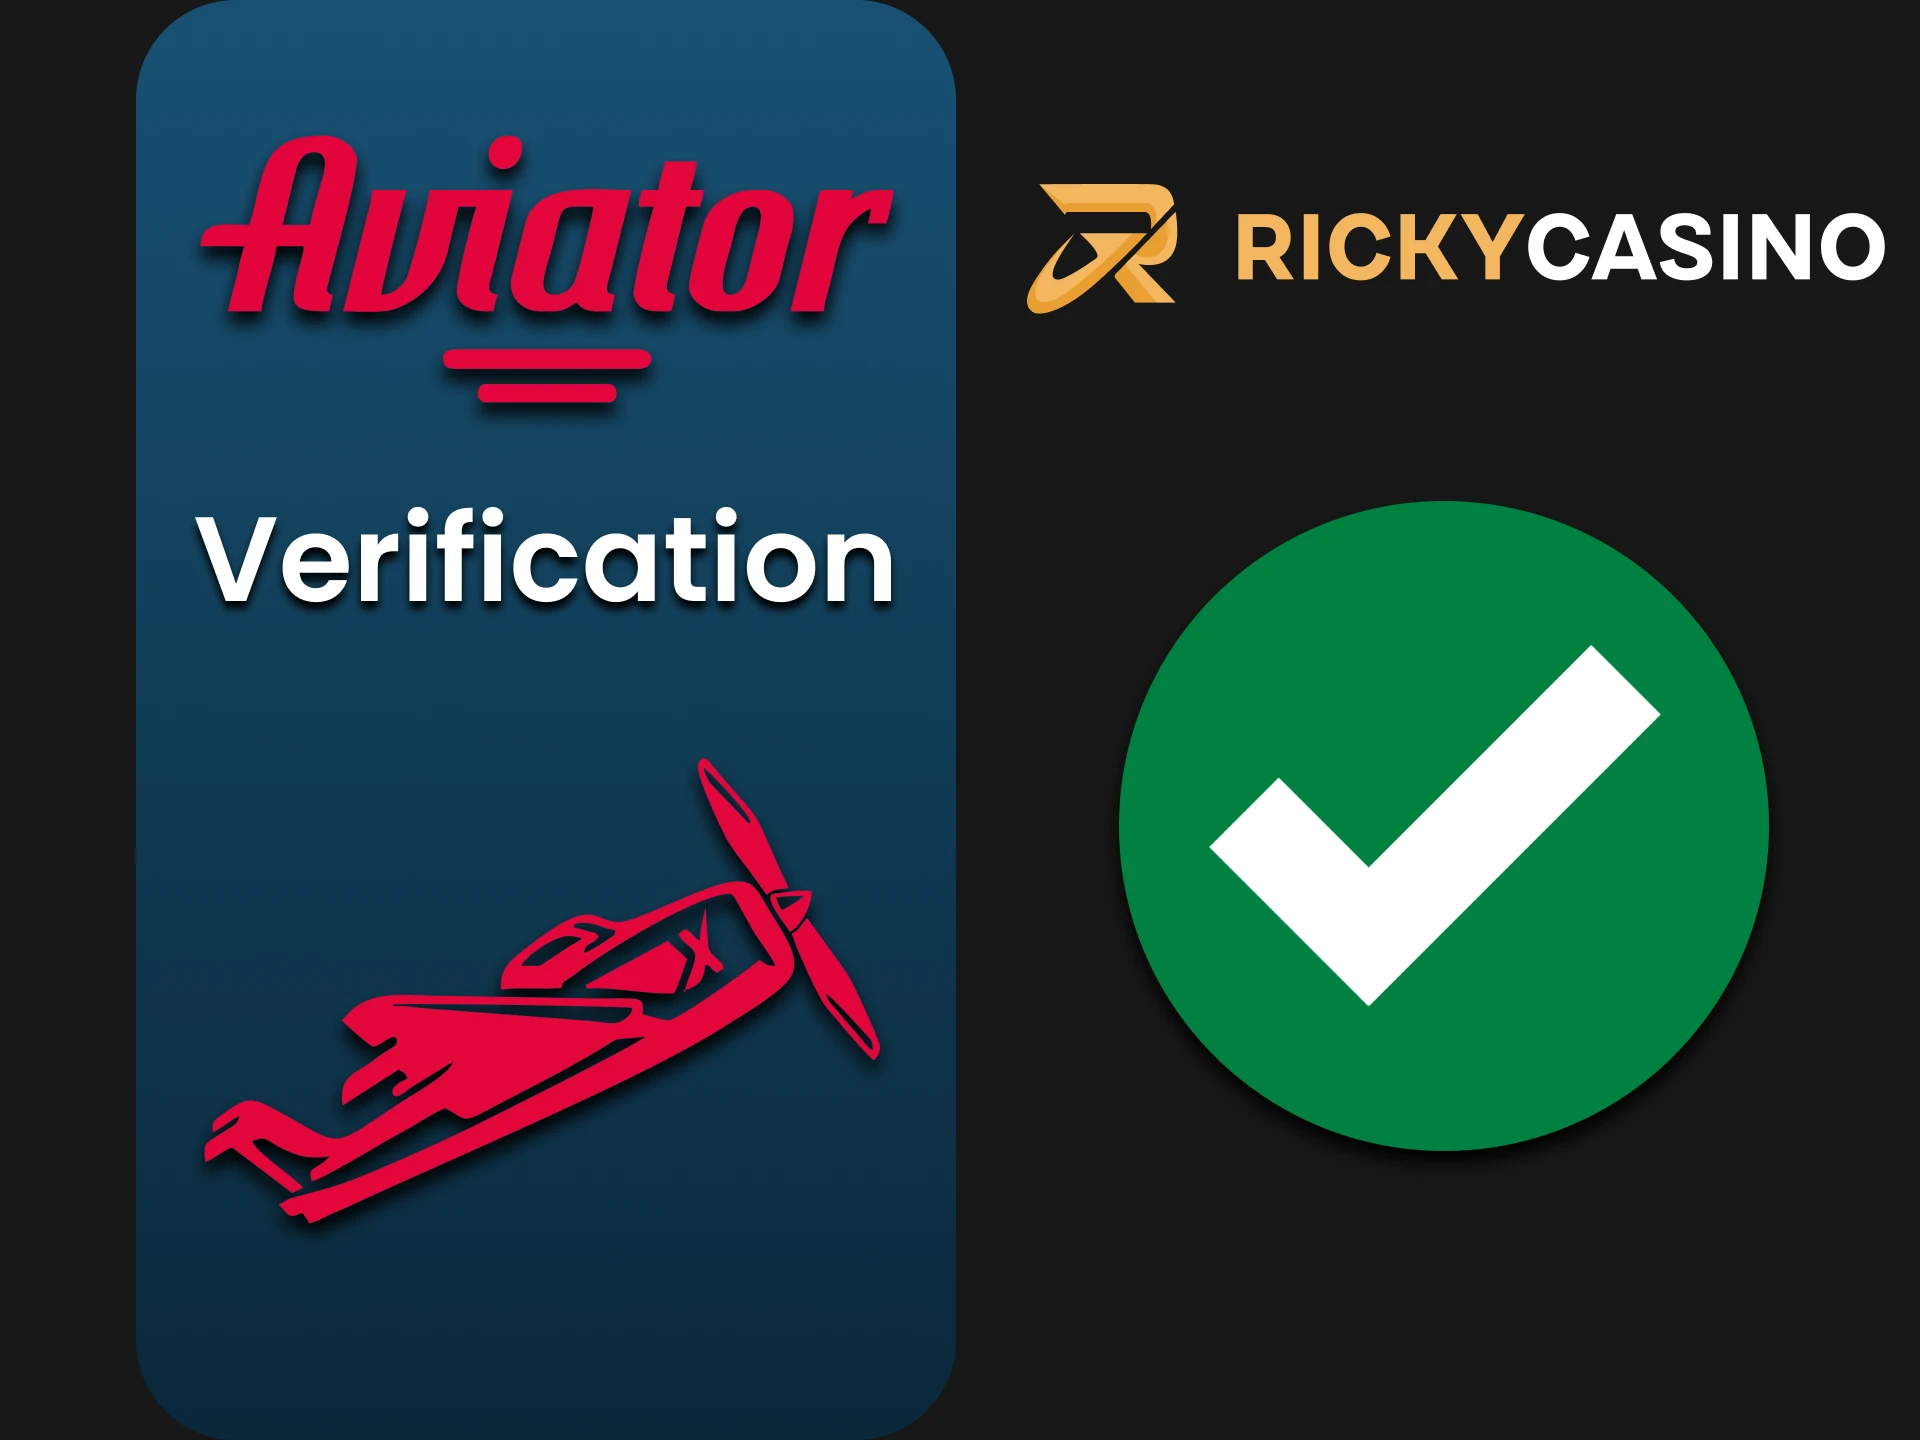 Enter all the data for the Ricky Casino website to play Aviator.